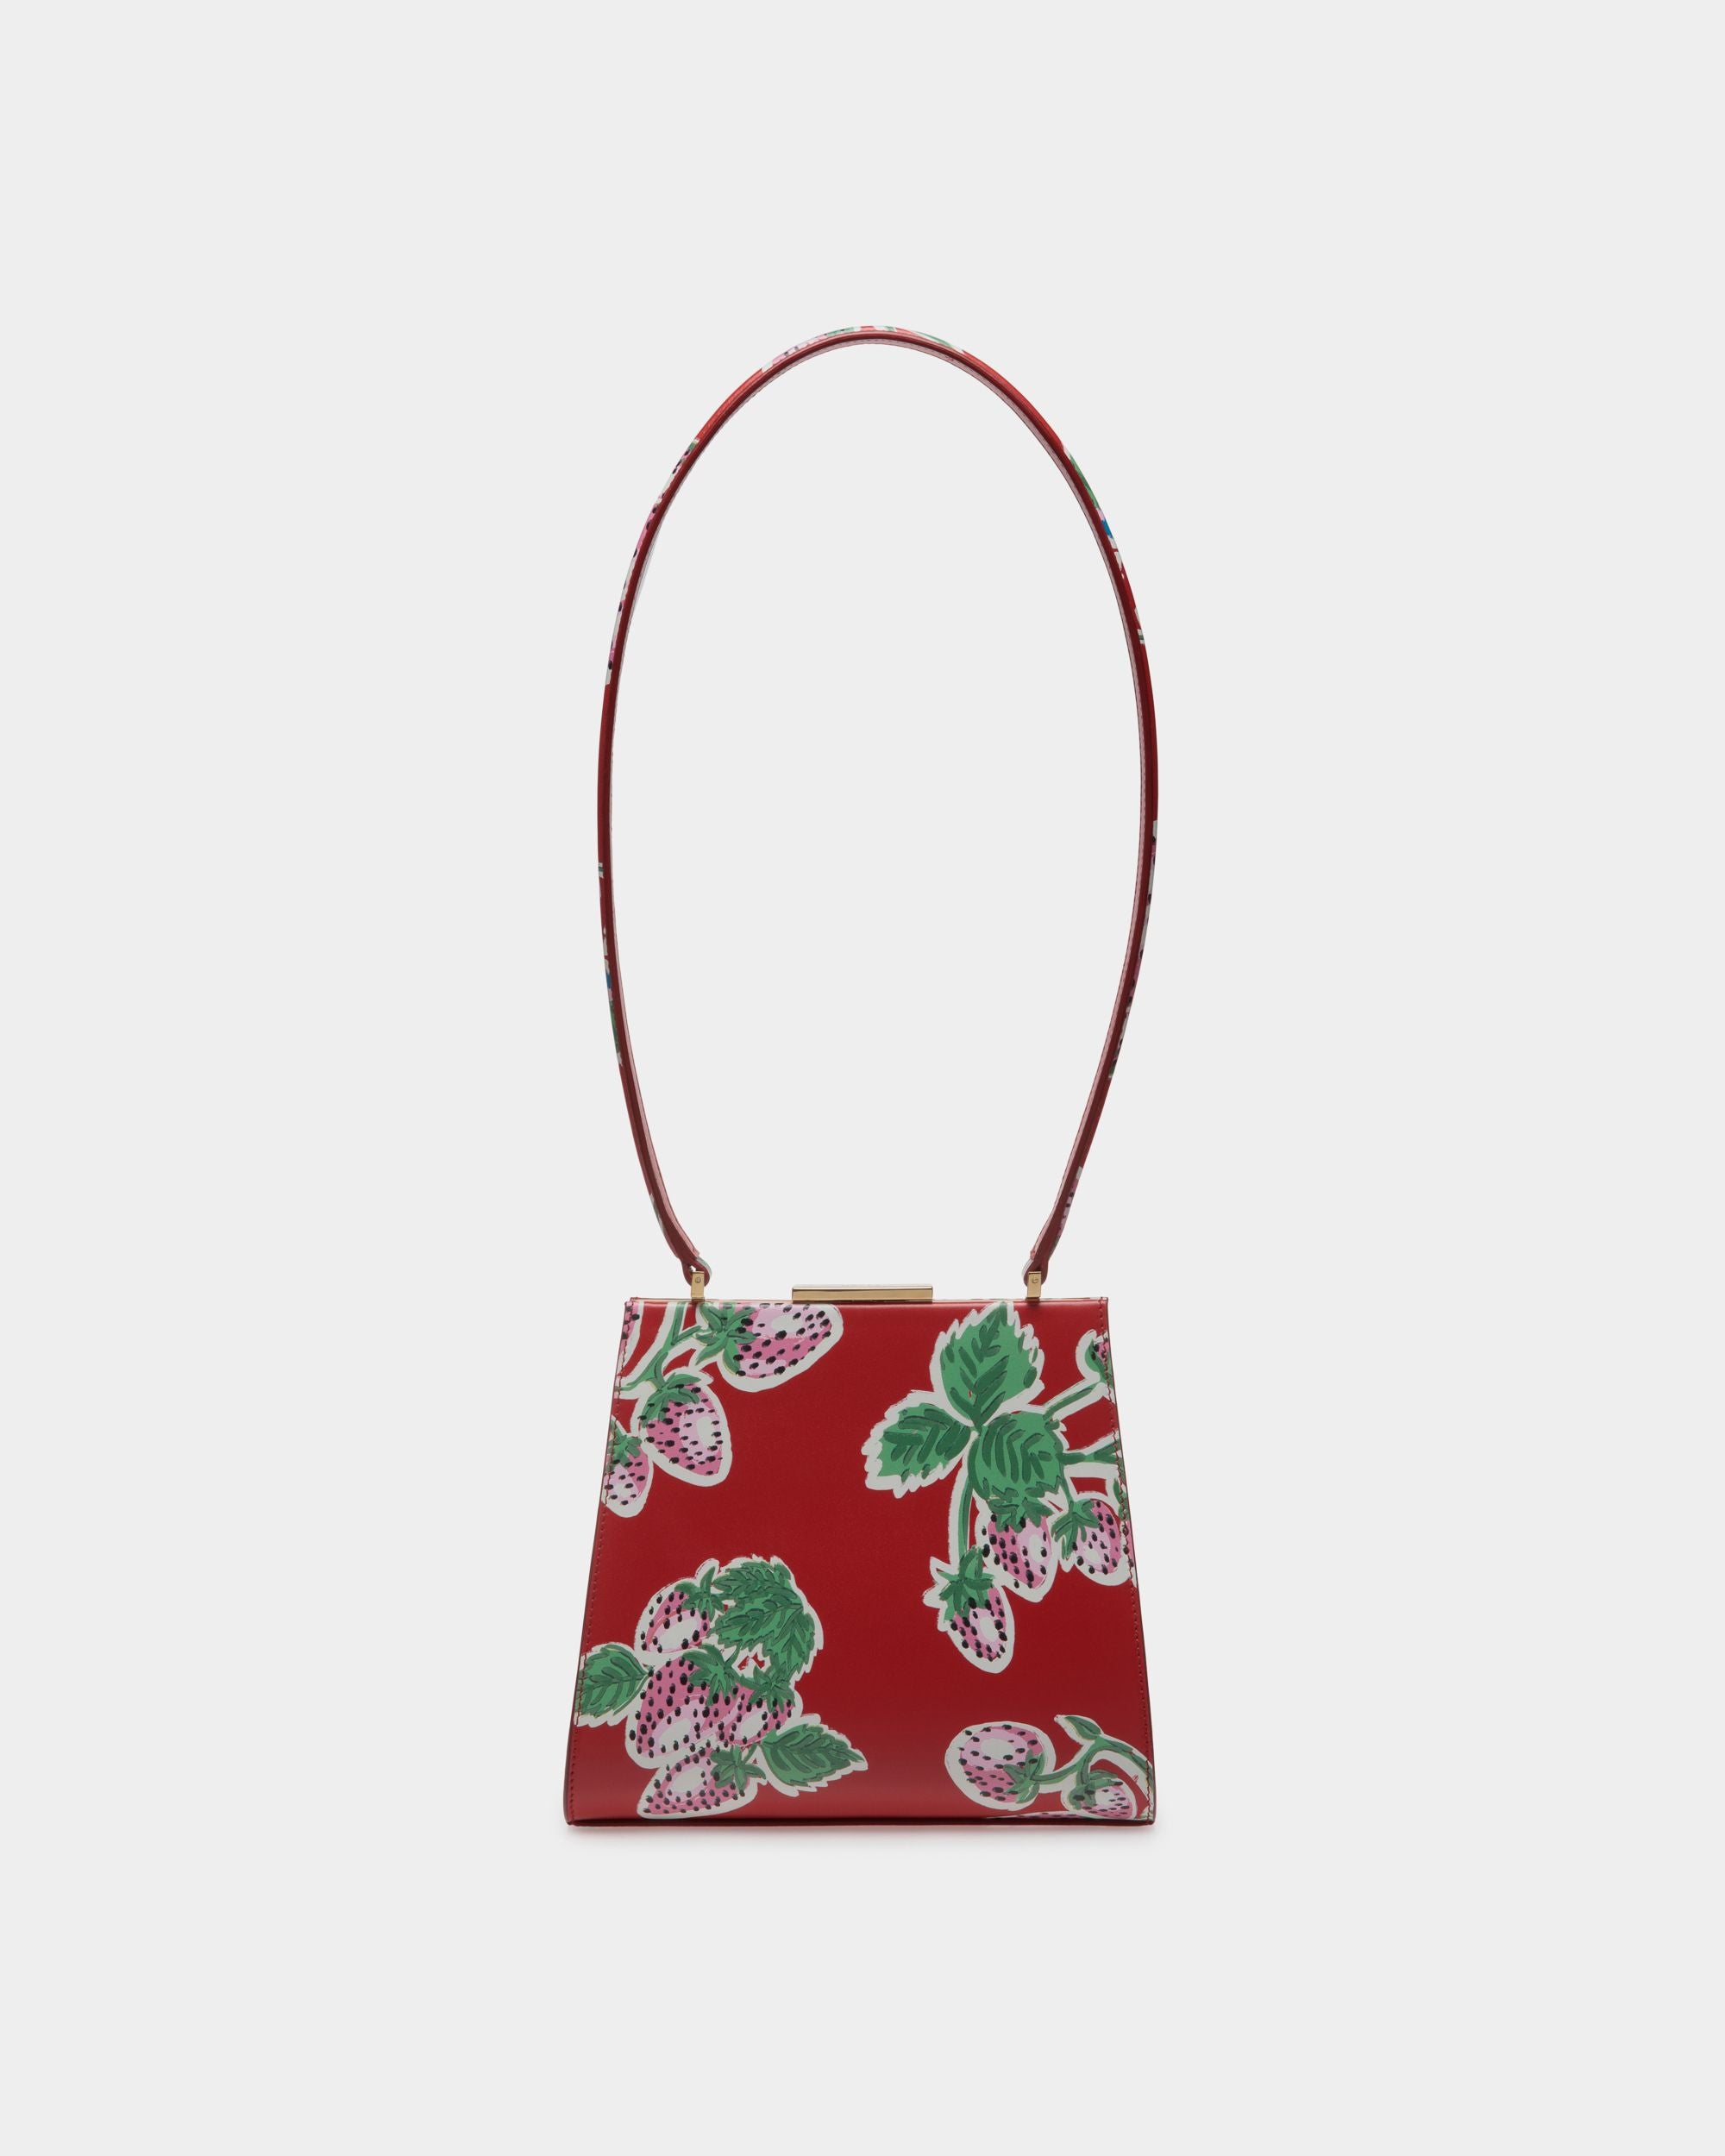 Deco | Women's Shoulder Bag in Strawberry Print Leather | Bally | Still Life Front